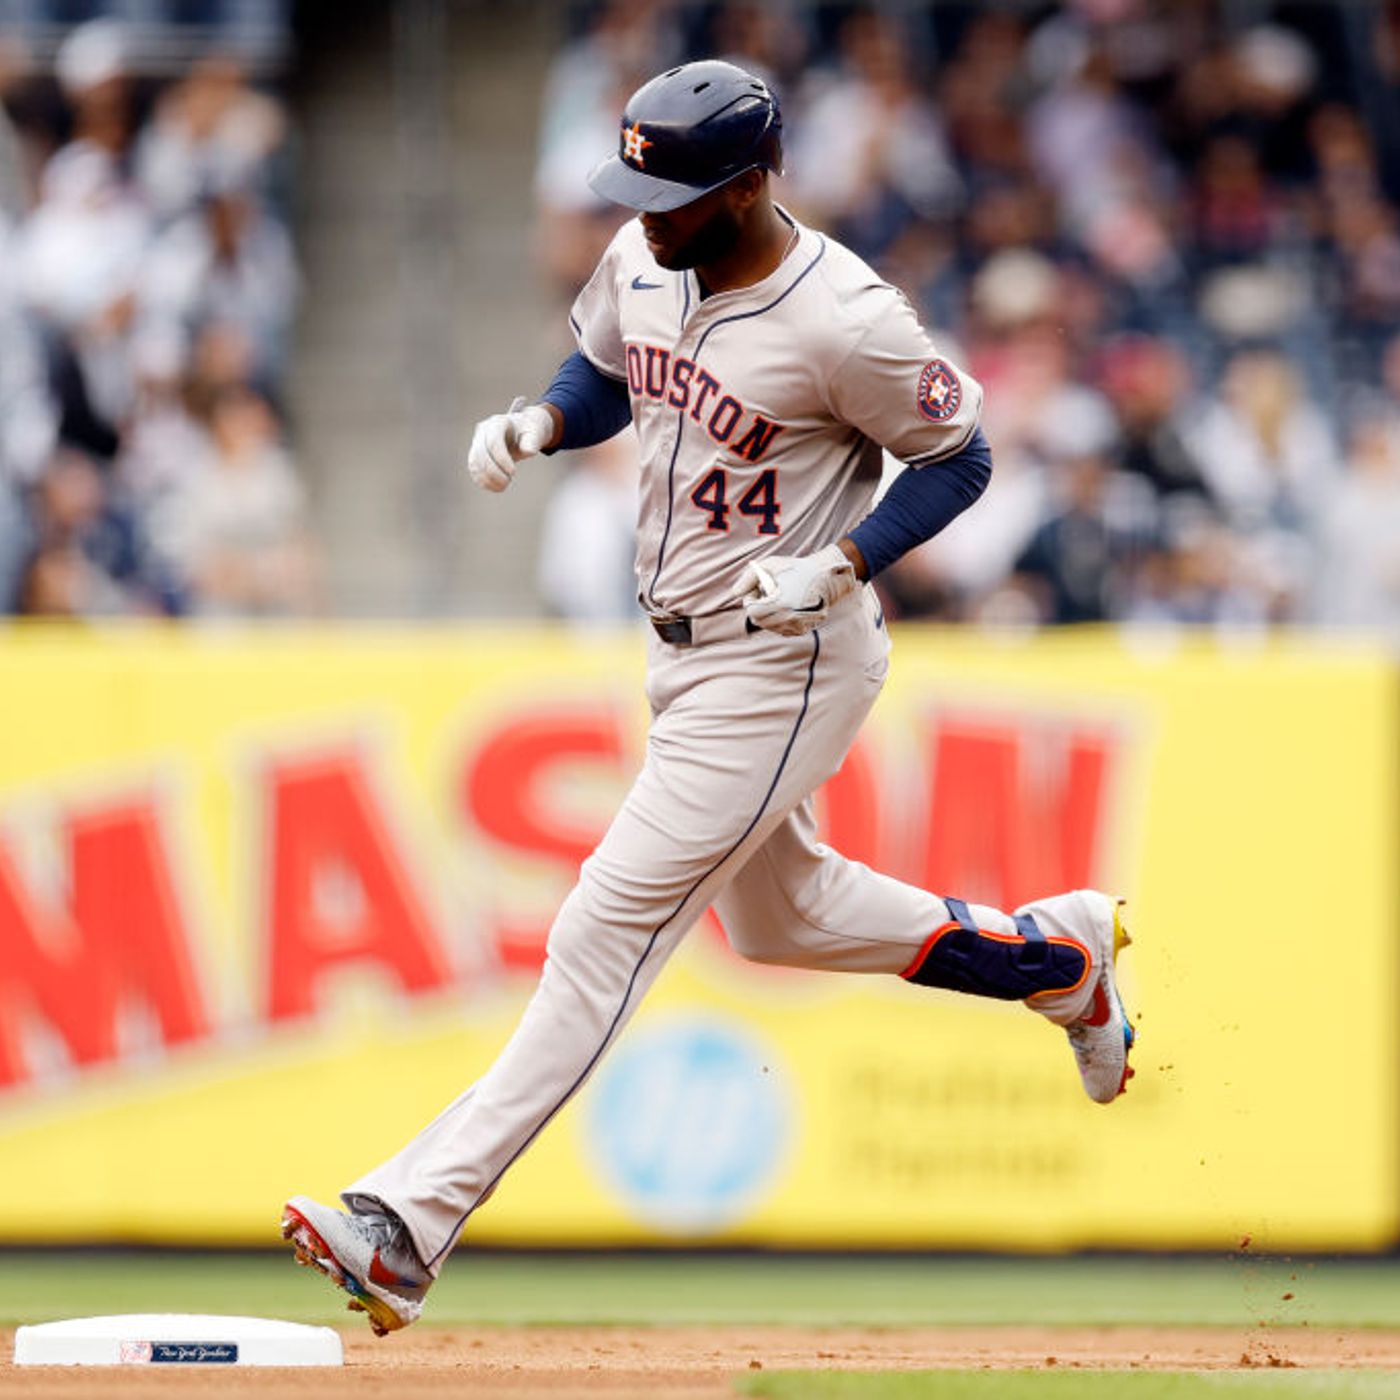 Astros Avoid Series Sweep, Singleton and Alvarez Step Up, Pressly Struggles In 8th Inning Role